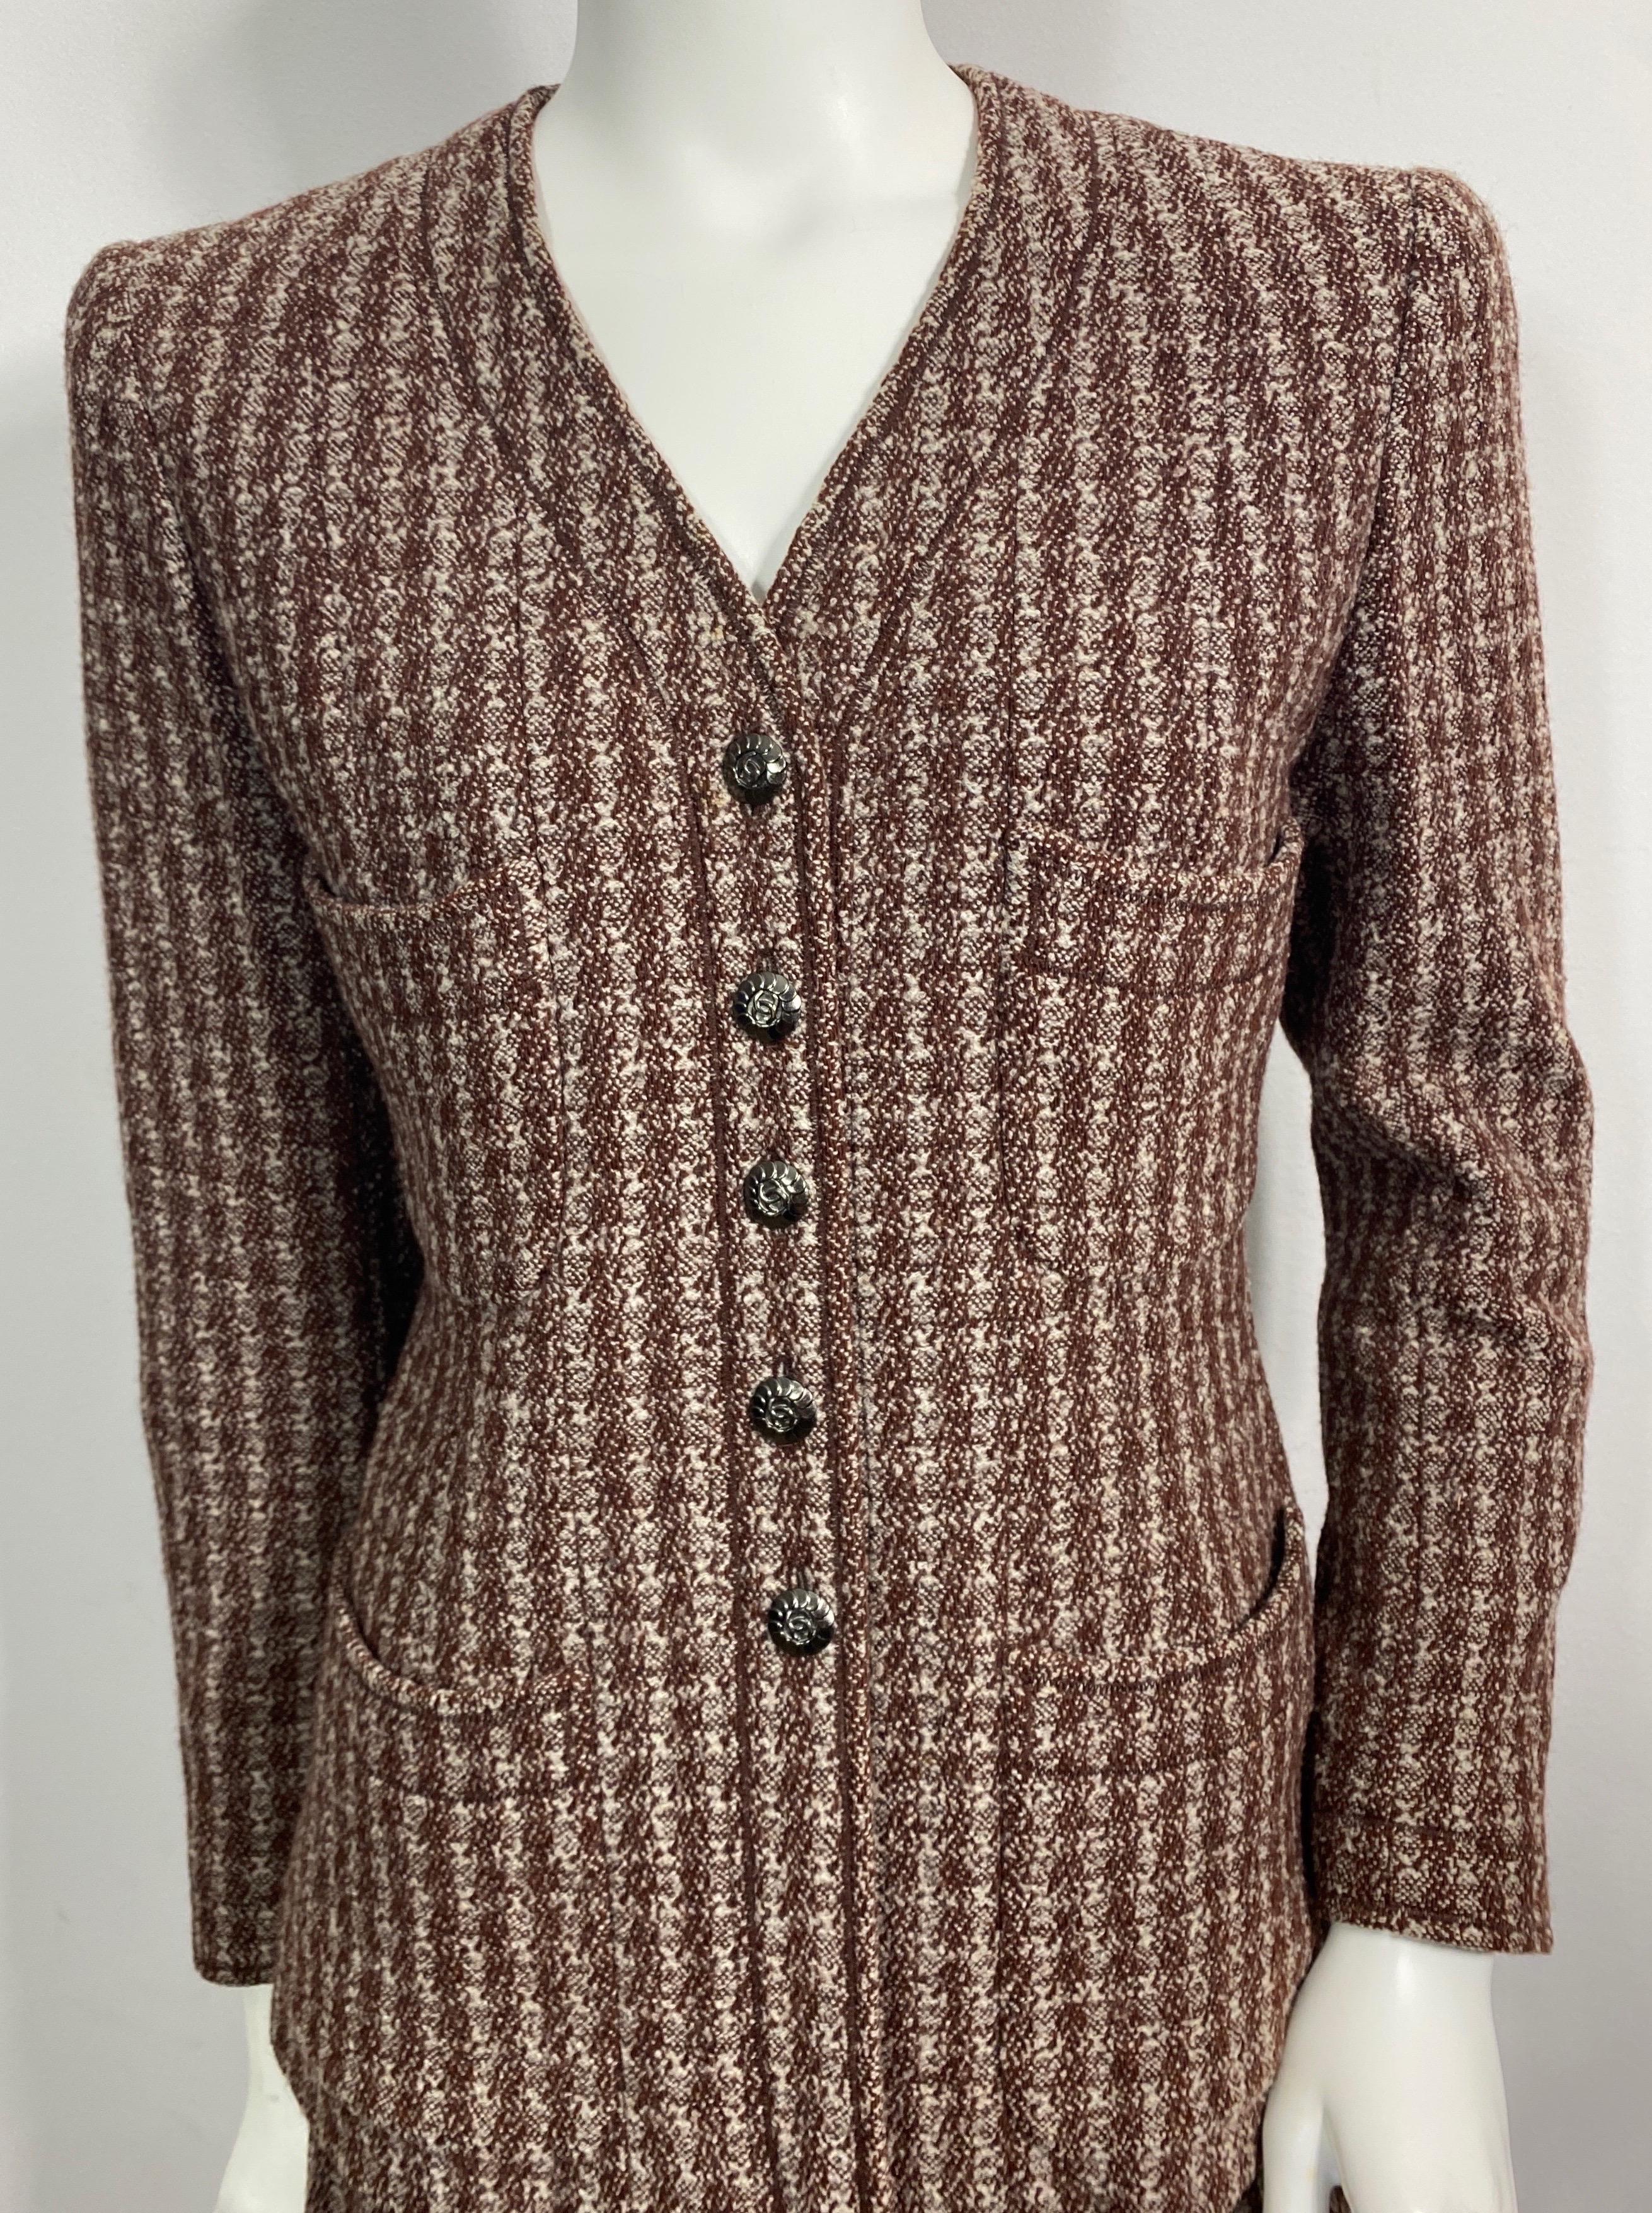 Women's Chanel 1990’s Brown and Crème Wool Nailshead Tweed Skirt Suit-size 36 For Sale